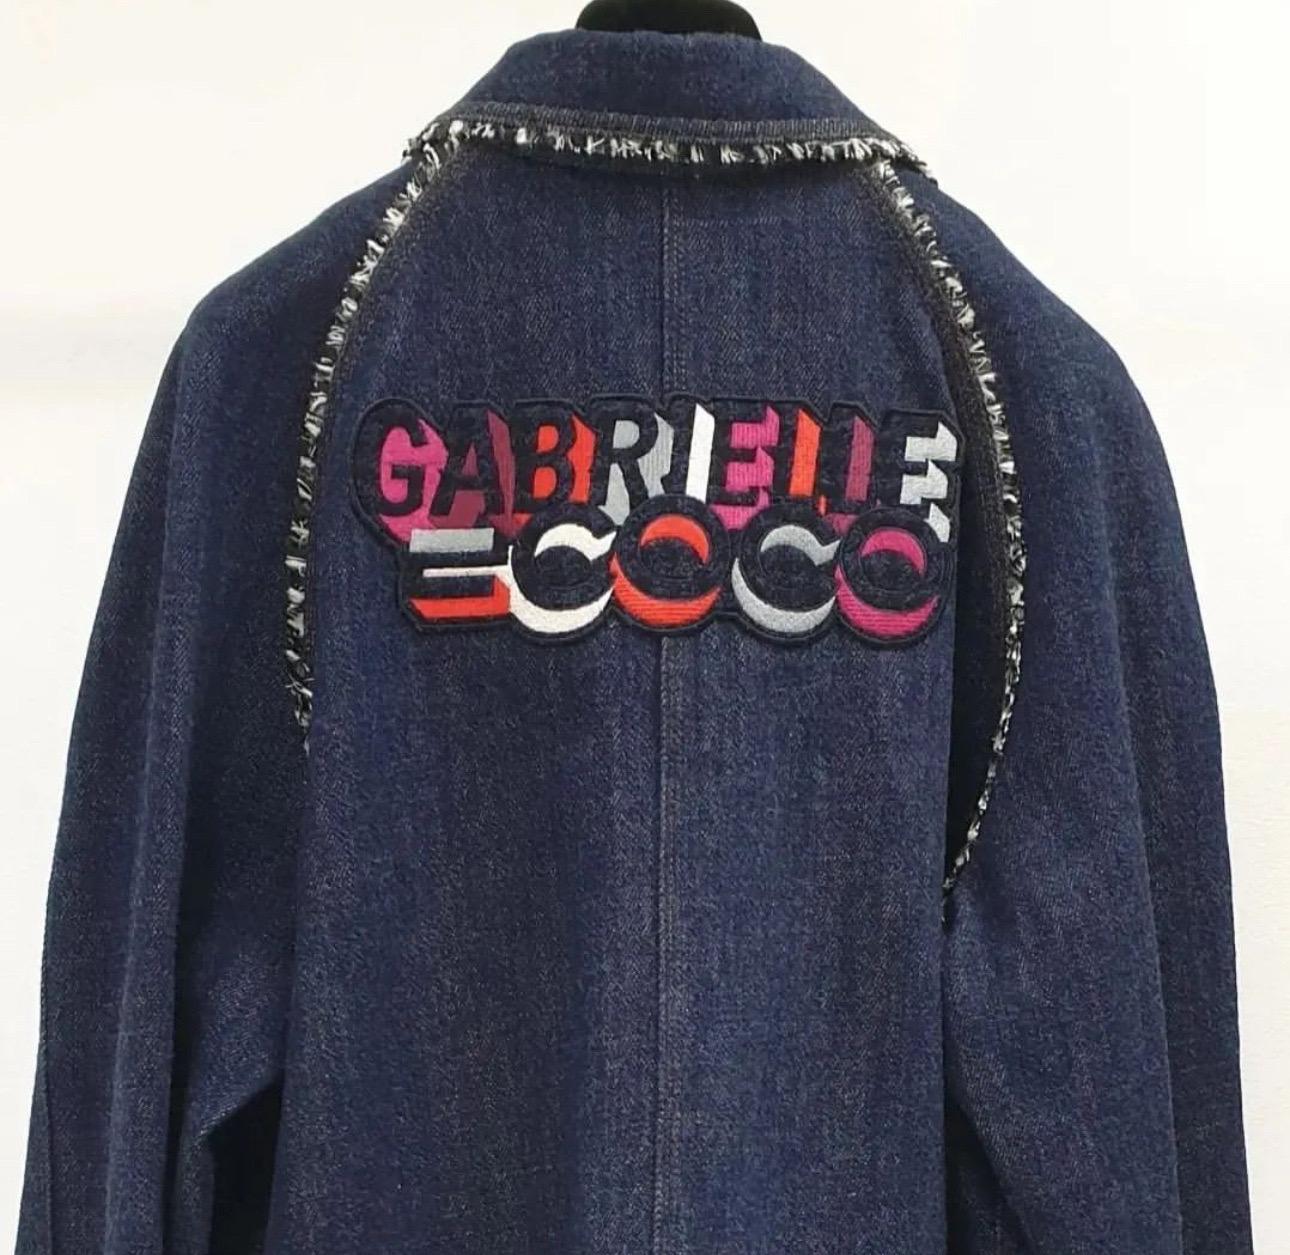 CHANEL 17A Gabrielle Coco Denim Jacket In Excellent Condition For Sale In Krakow, PL